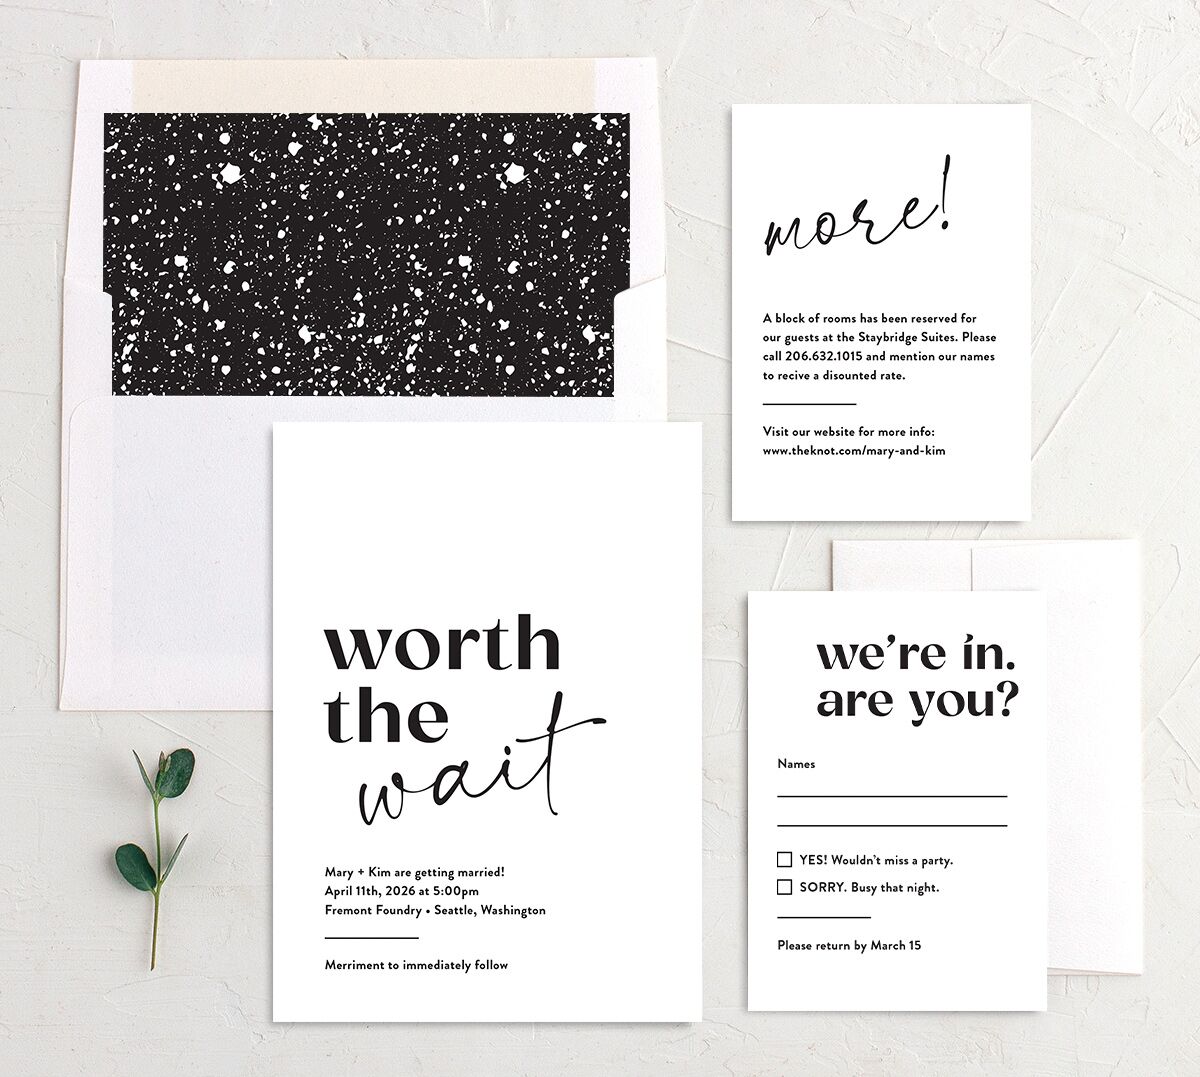 Worth the Wait Wedding Invitations suite in White